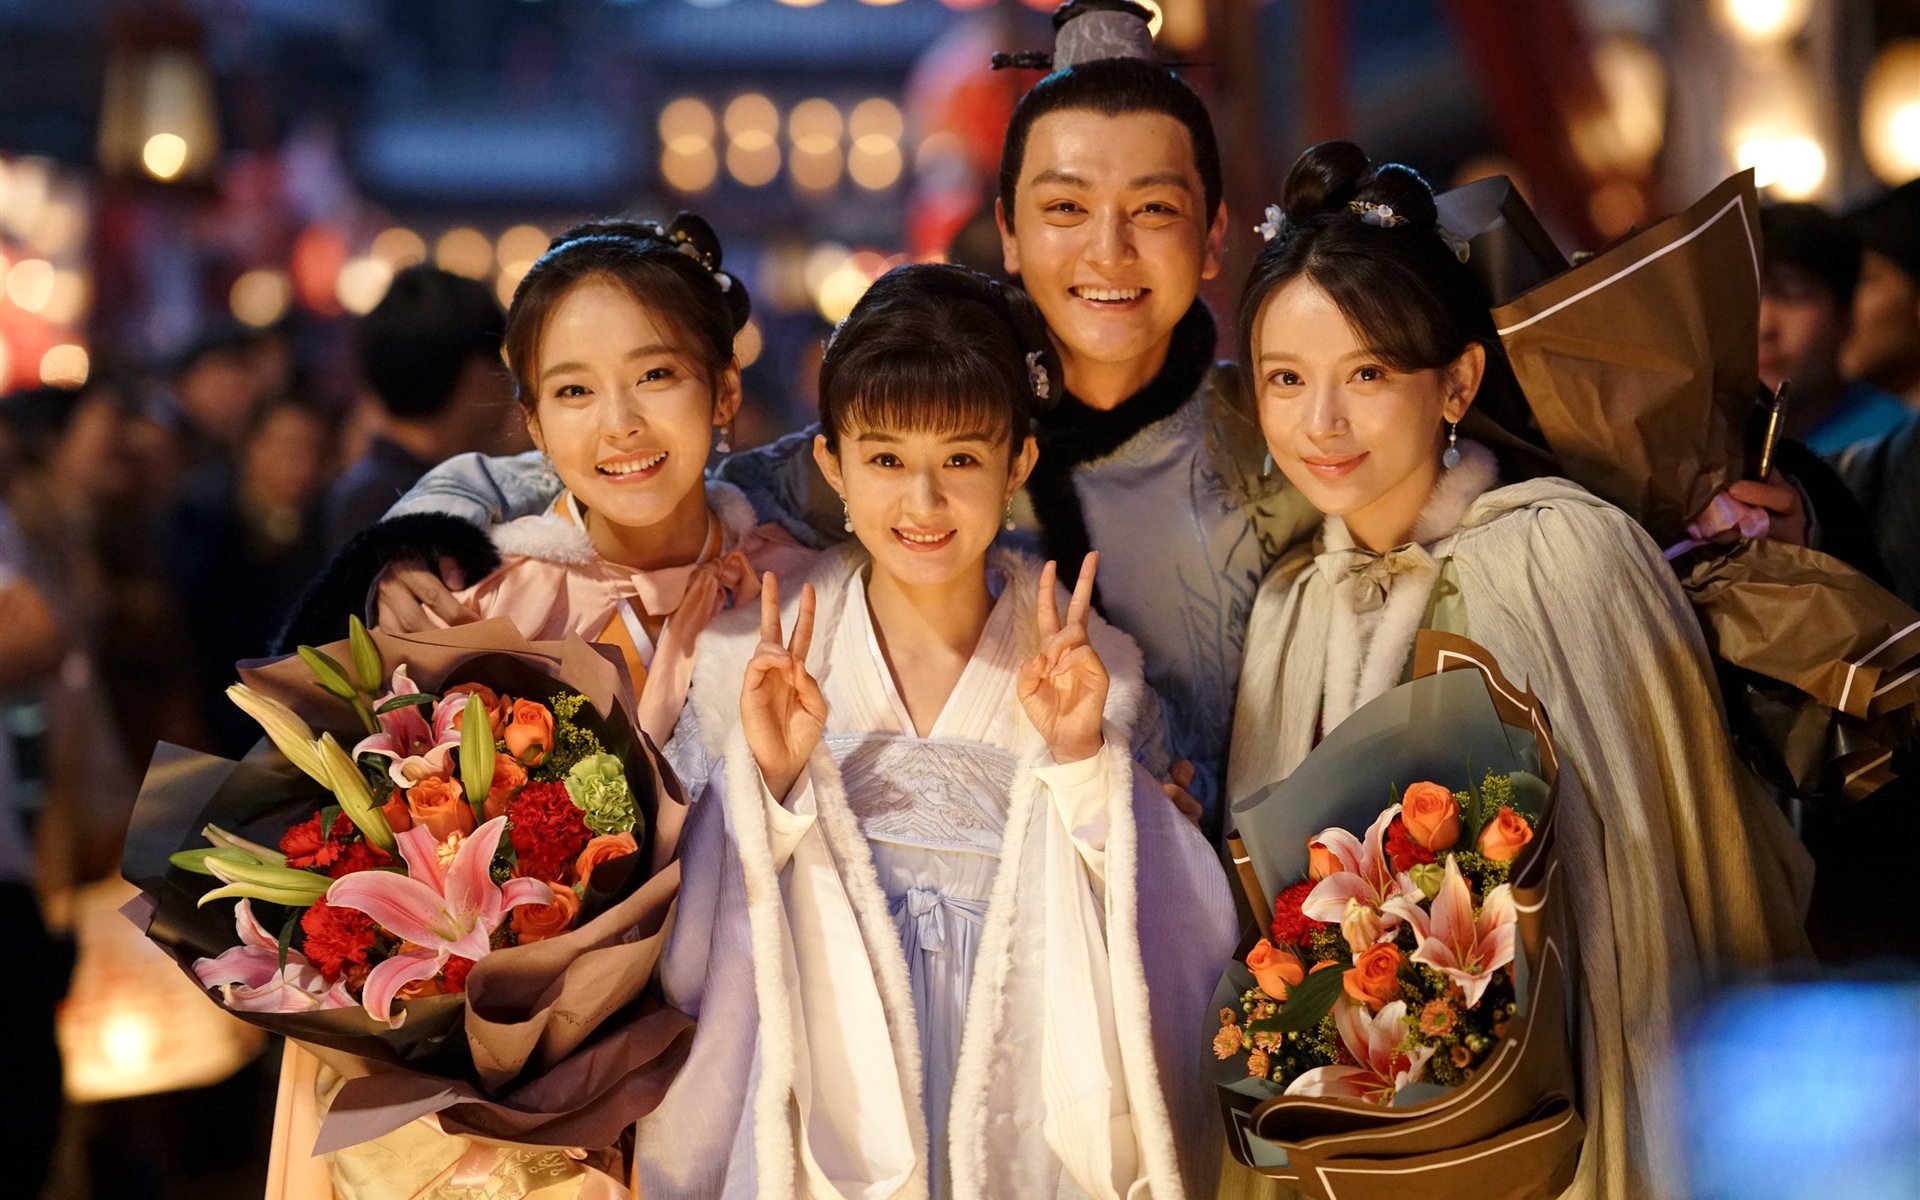 The Story Of MingLan, TV series HD wallpapers #48 - 1920x1200